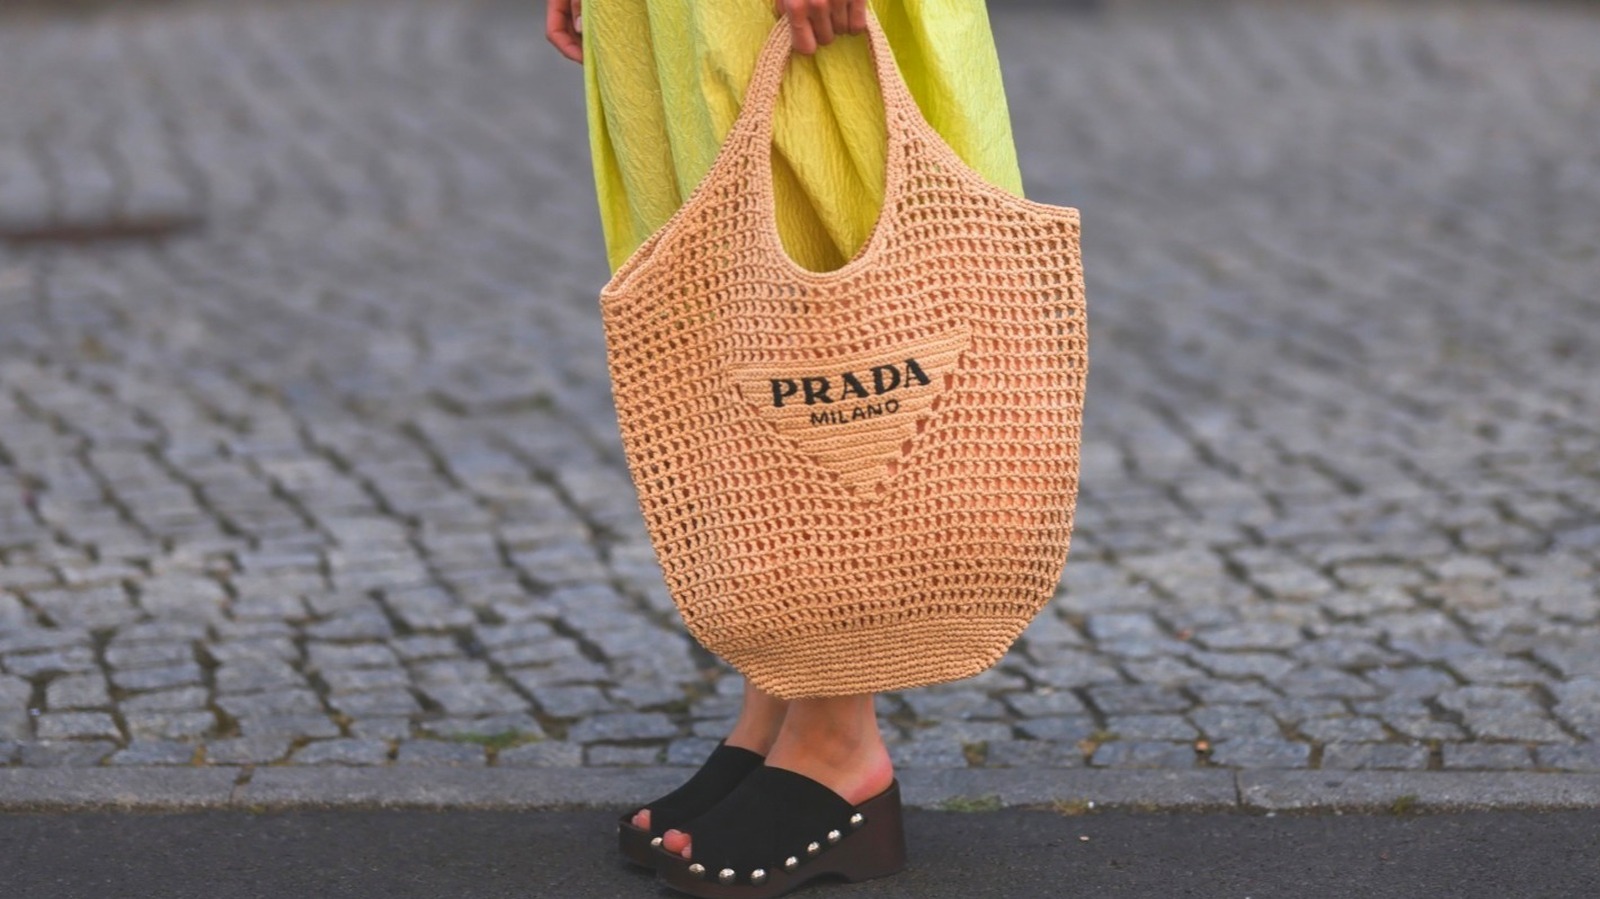 https://www.thelist.com/img/gallery/raffia-accessories-will-be-everywhere-in-summer-2023-here-are-our-best-tips-for-styling-them/l-intro-1679230716.jpg